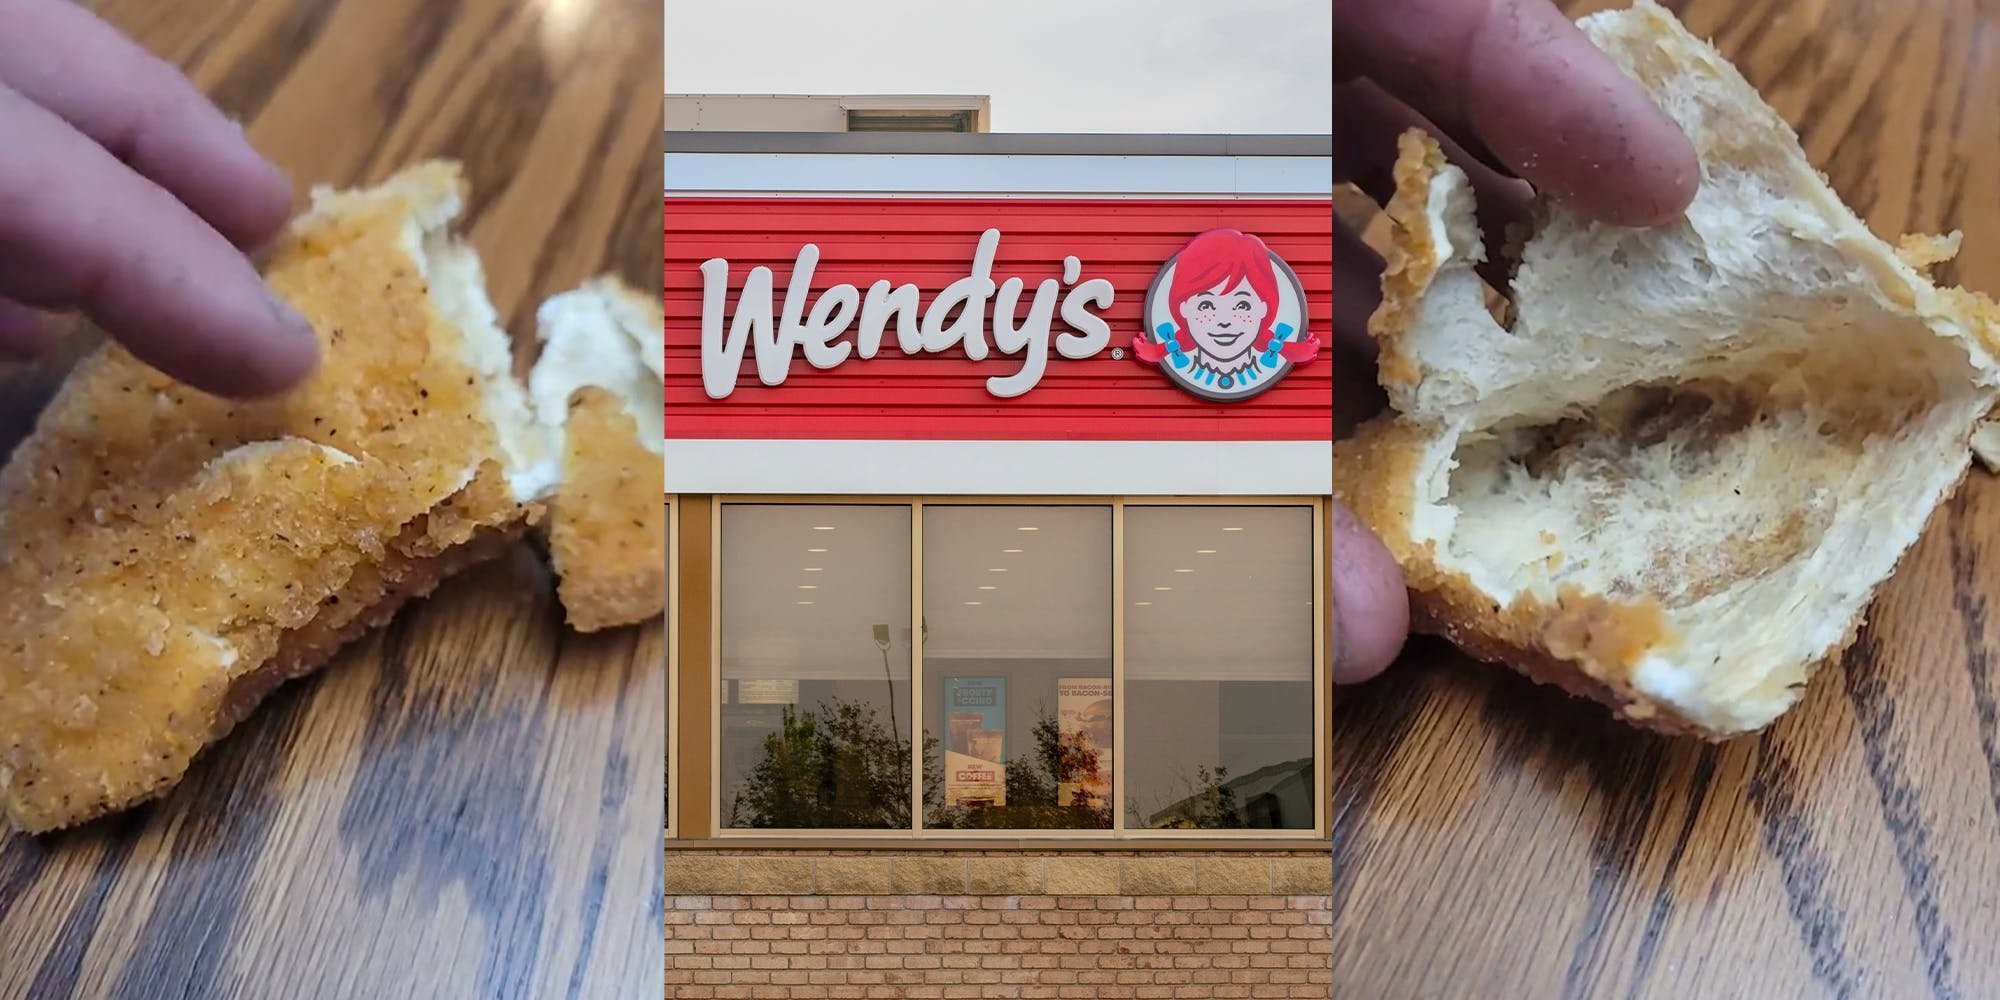 Burger pills, chicken sandwich truths, and more tales of Wendy's gone wild